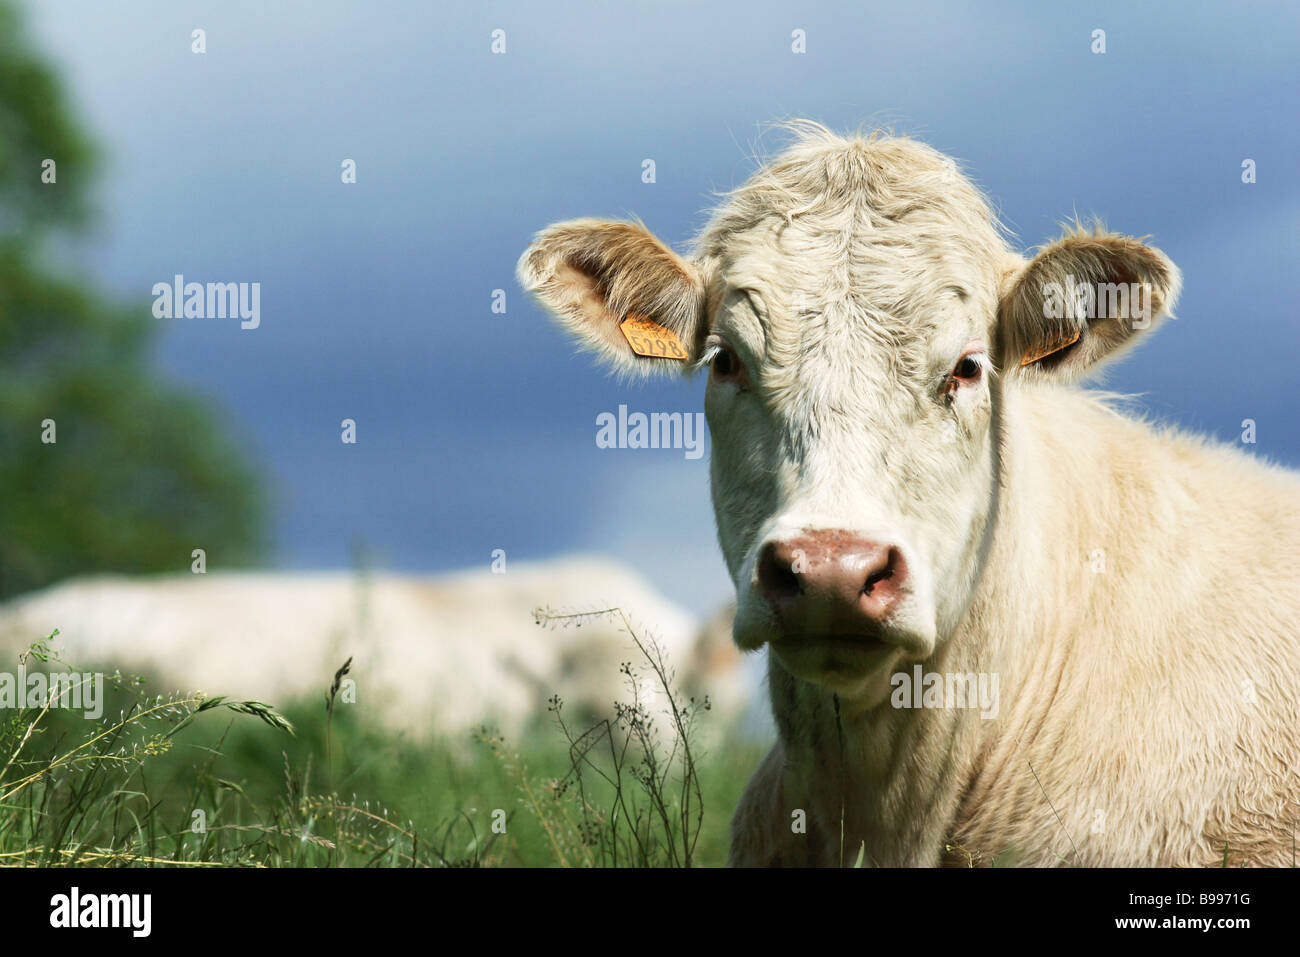 White cow in pasture, close-up Stock Photo